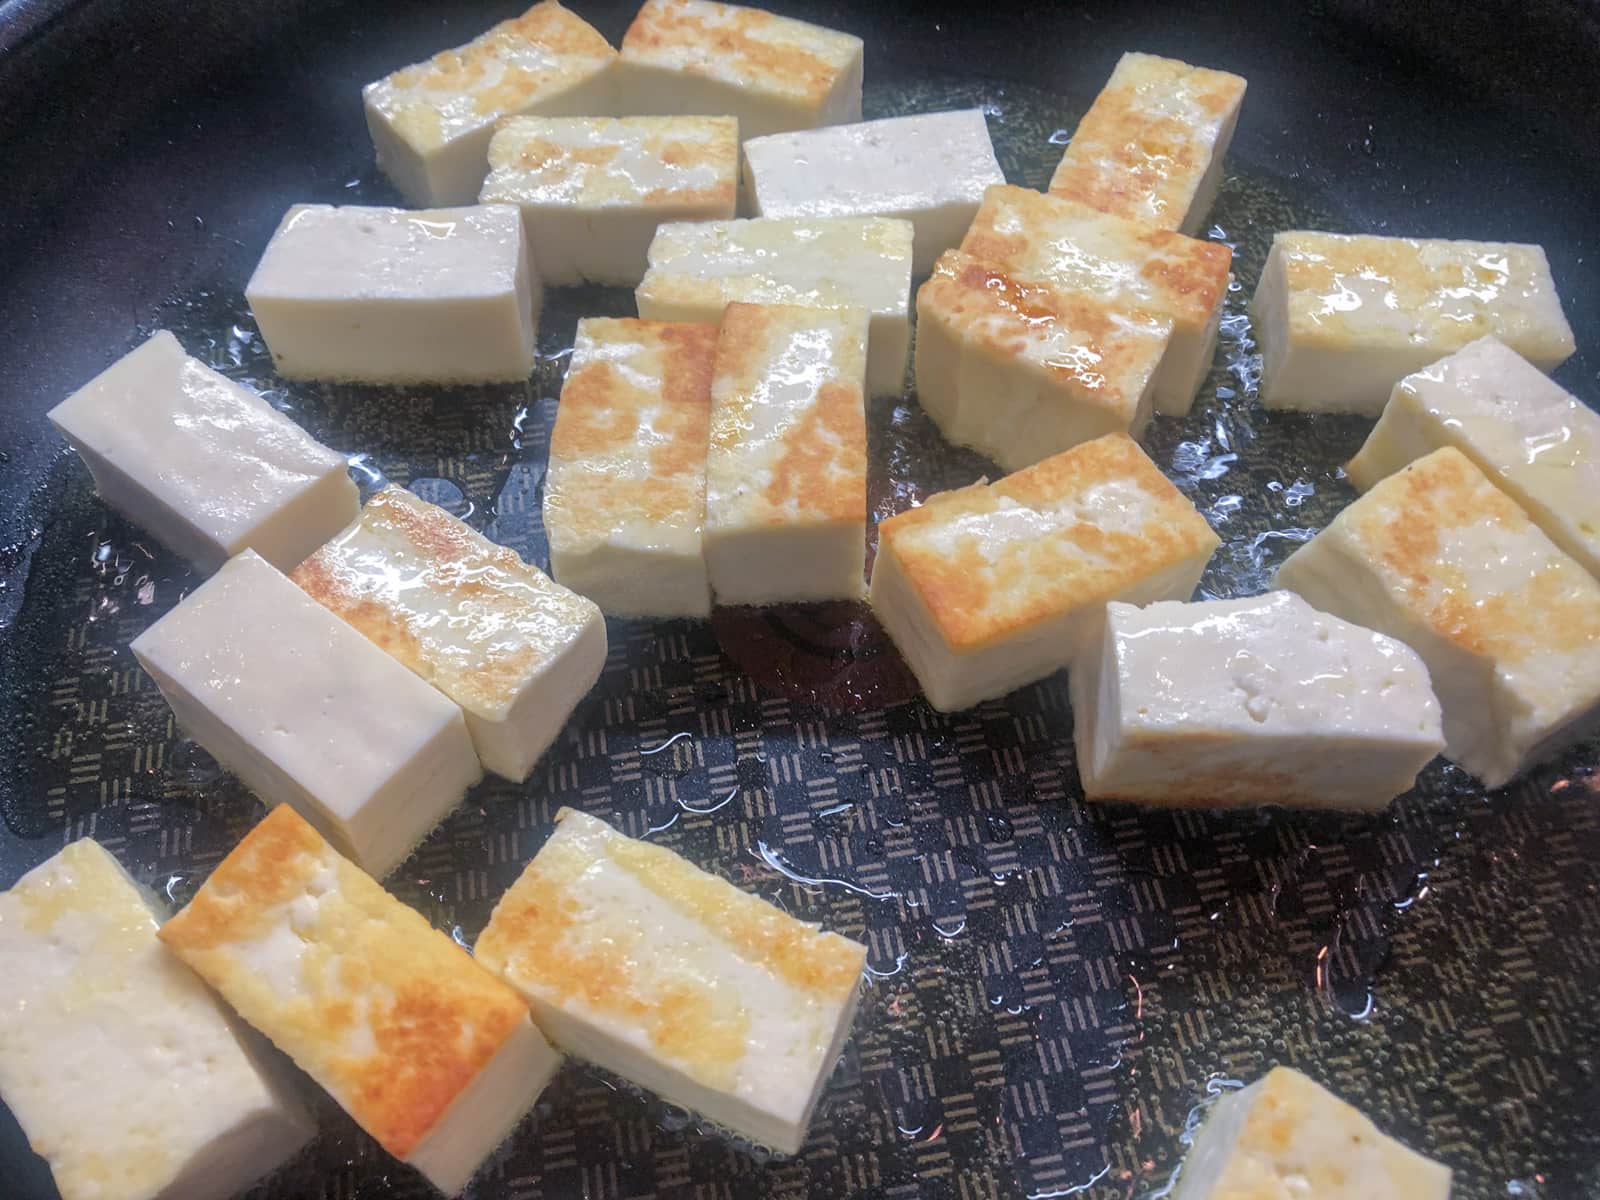 Colour starting to show on paneer cheese being fried in ghee.